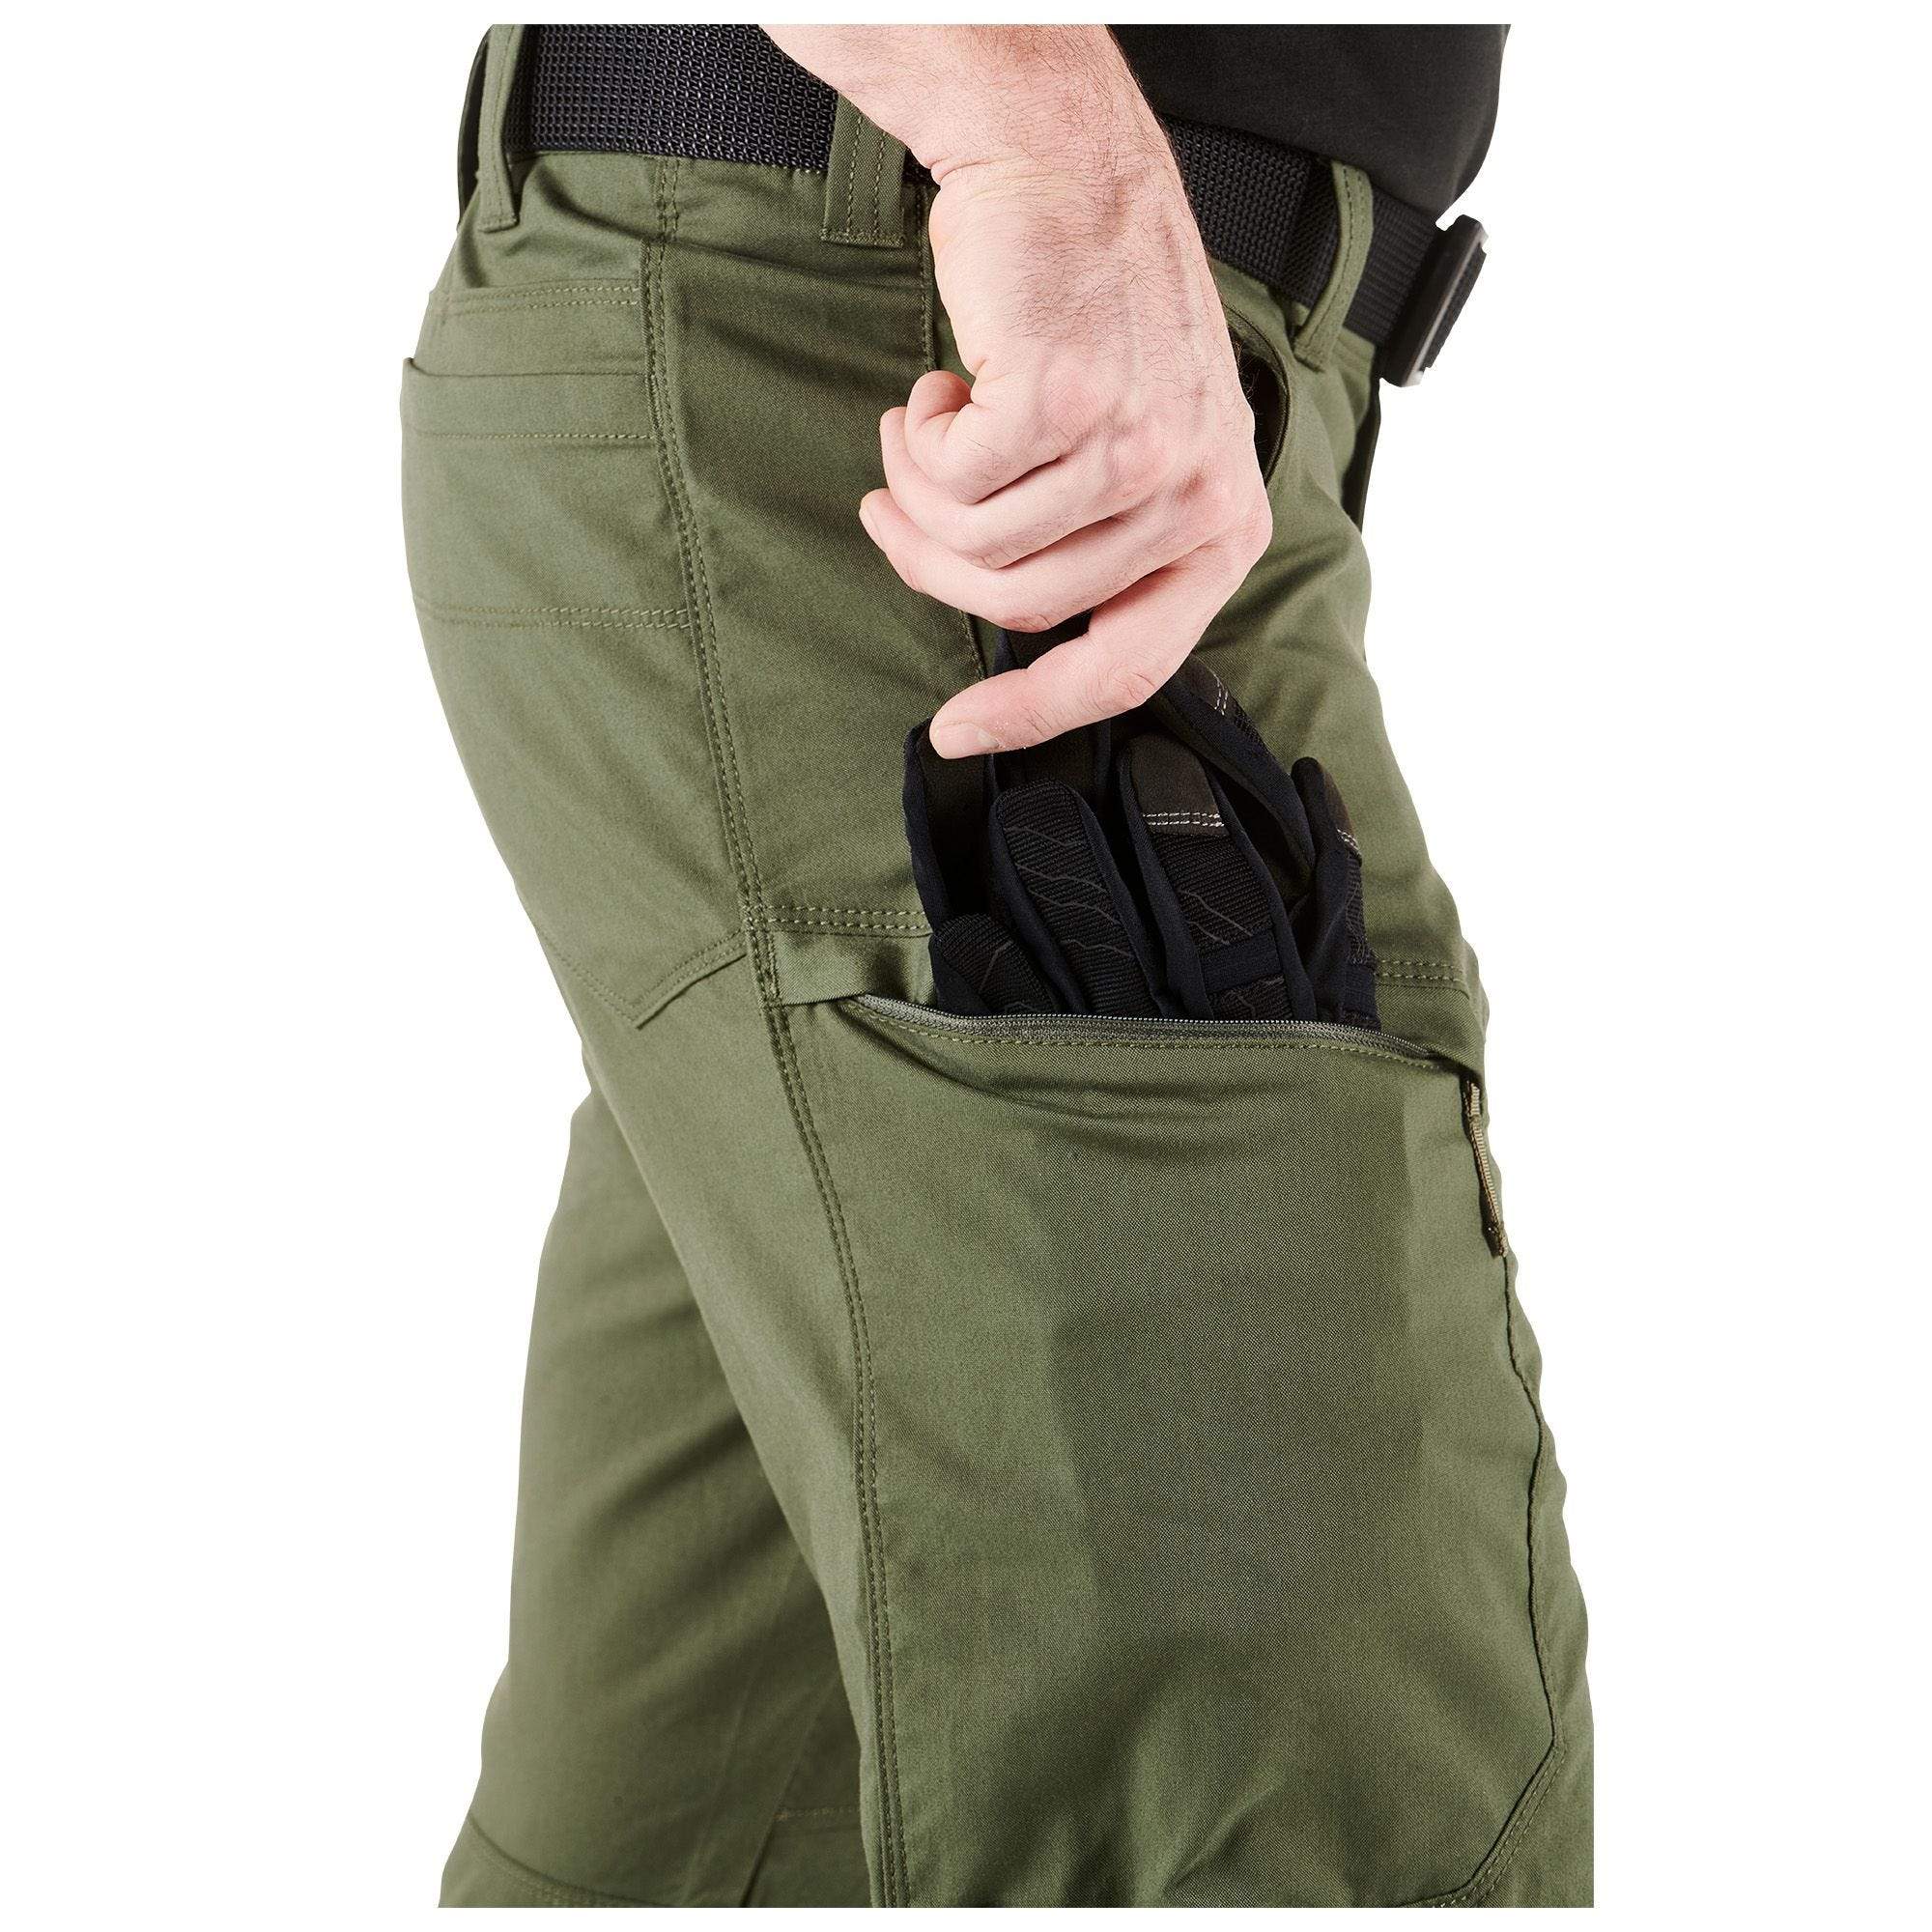 5.11 Tactical Apex Pant for Hiking Review - OutRecording